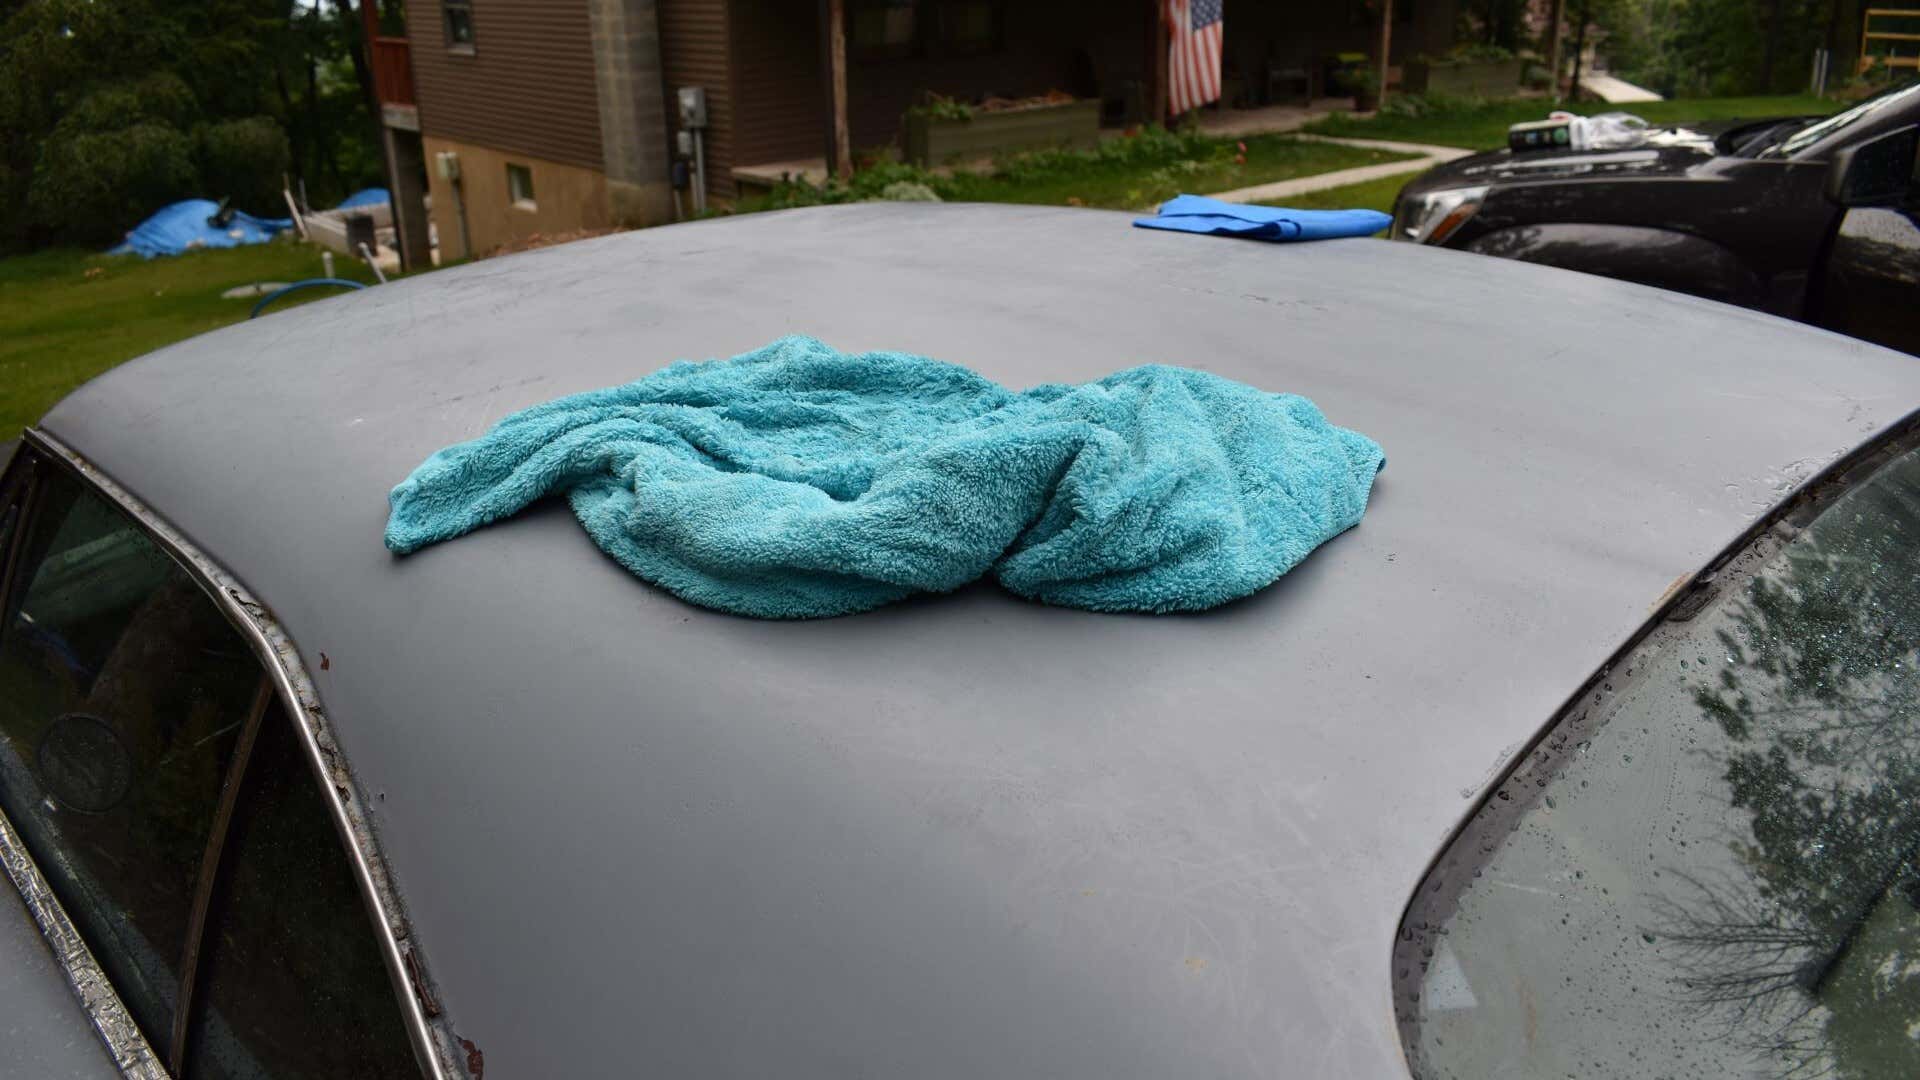 A microfiber towel on the roof of a '69 Dodge Charger.